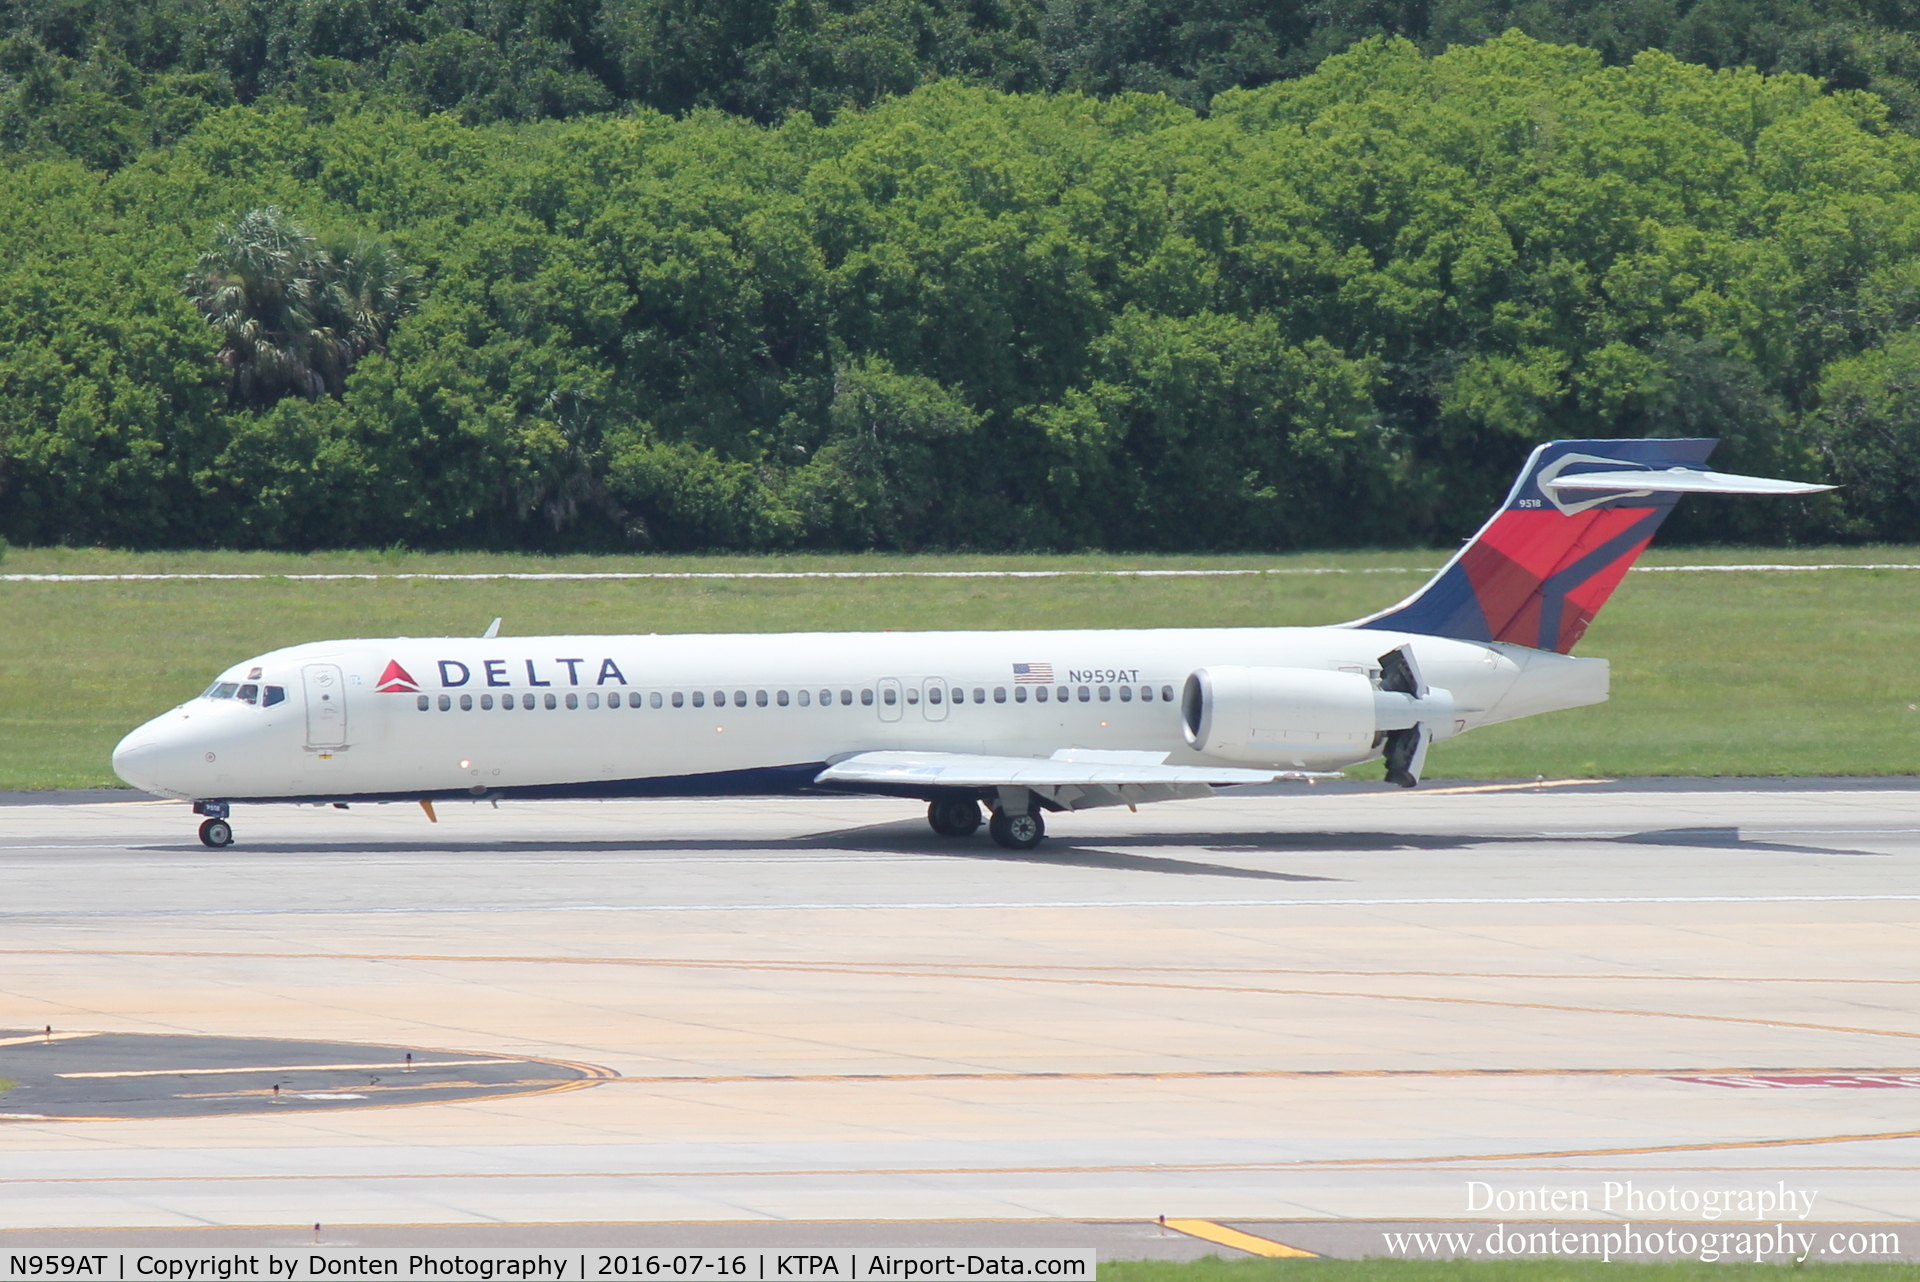 N959AT, 2001 Boeing 717-200 C/N 55021, Delta Flight 2593 (N959AT) arrives at Tampa International Airport following flight from John F Kennedy International Airport